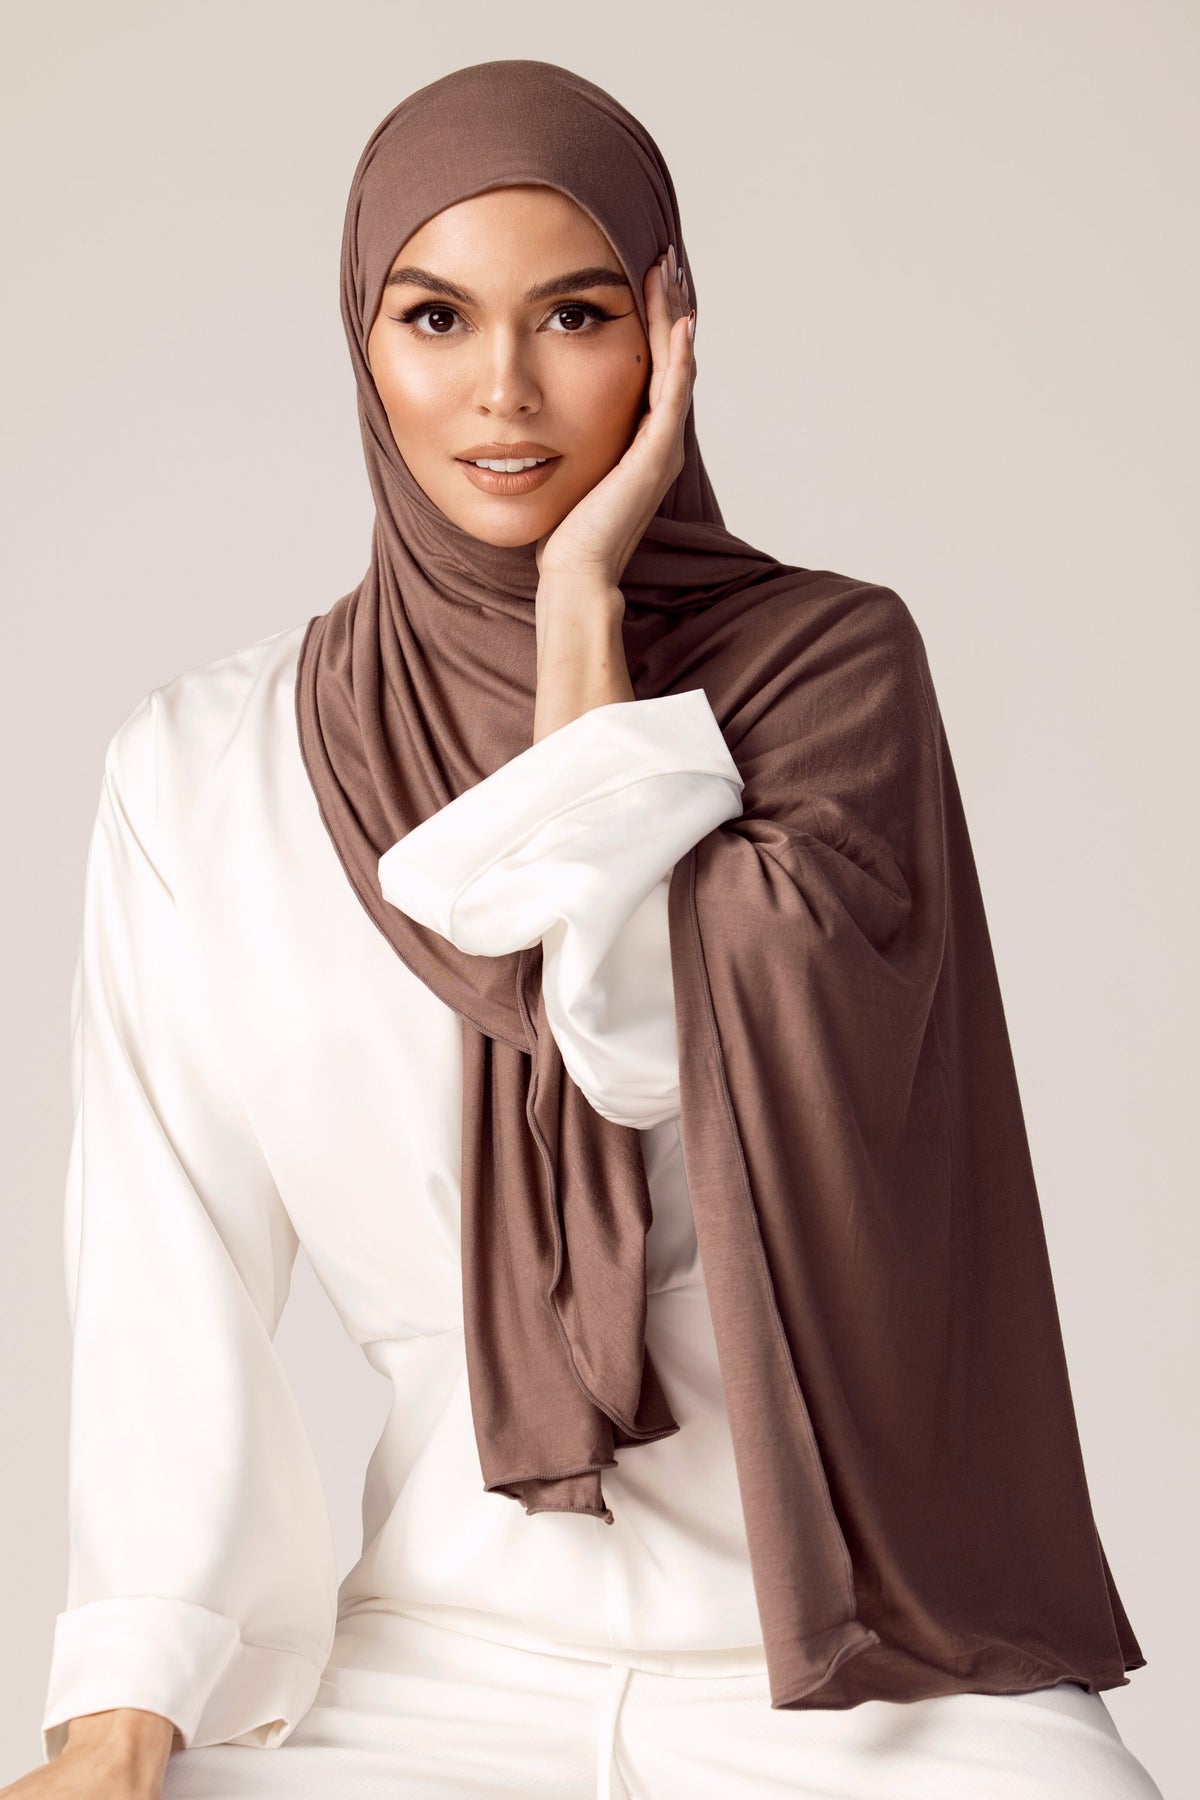 Luxury Jersey Hijab - Taupe Veiled Collection 